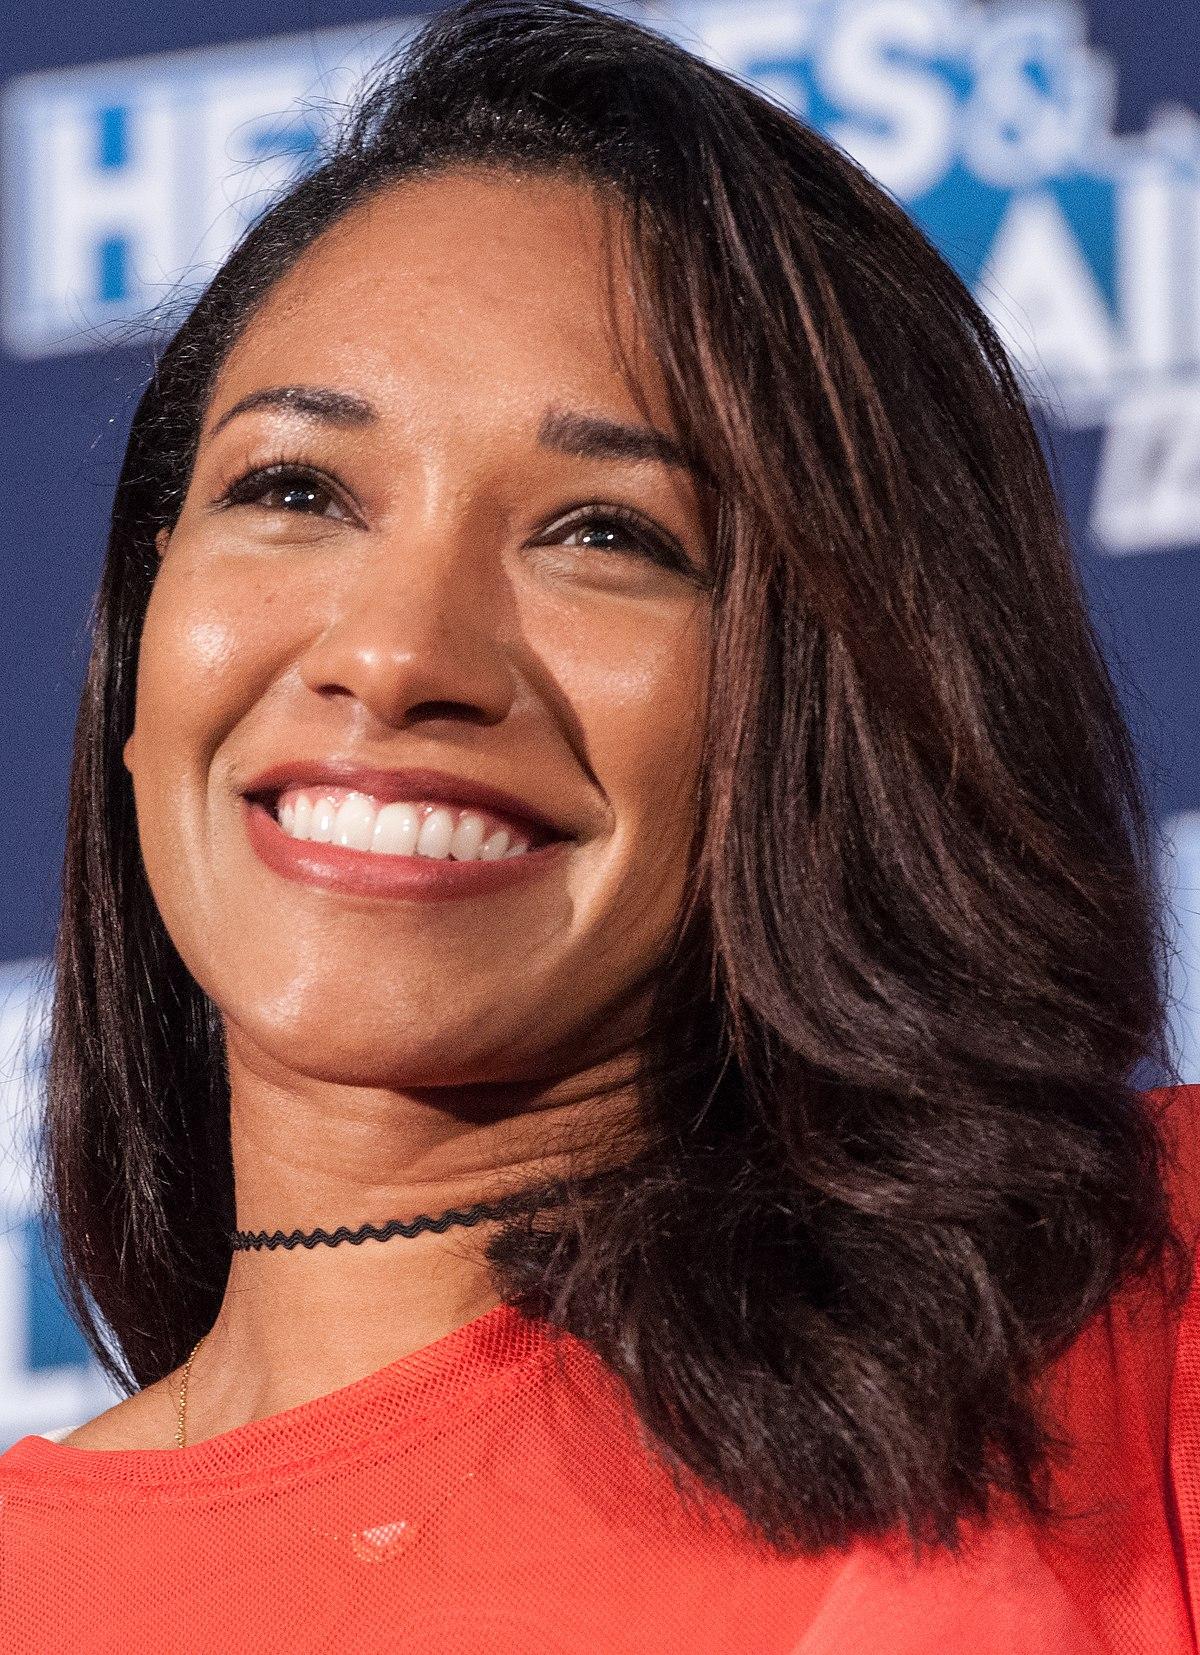 70+ Hot Pictures Of Candice Patton Who Plays Iris West In Flash TV Series 35